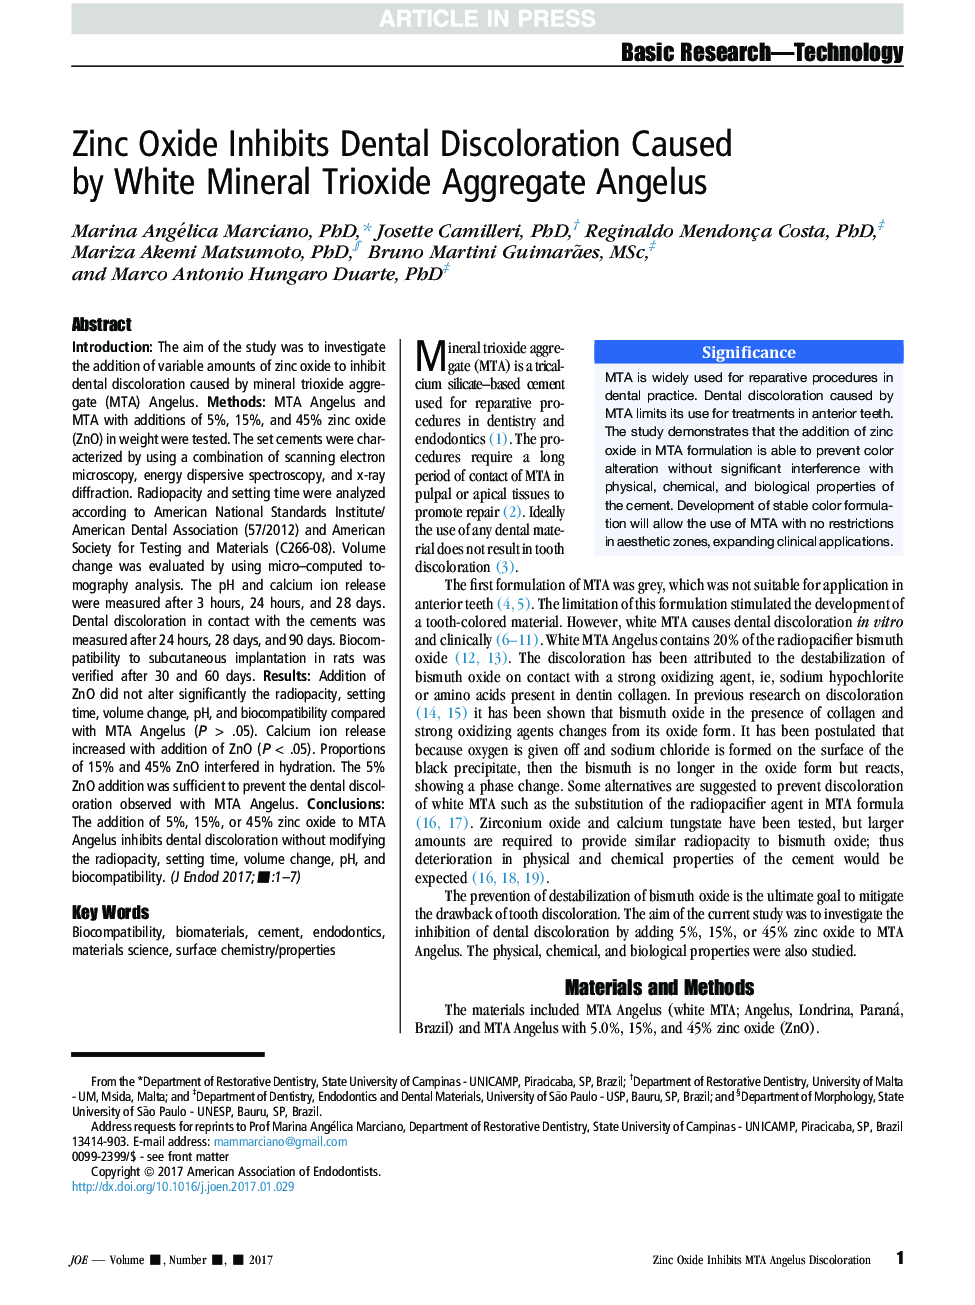 Zinc Oxide Inhibits Dental Discoloration Caused by White Mineral Trioxide Aggregate Angelus